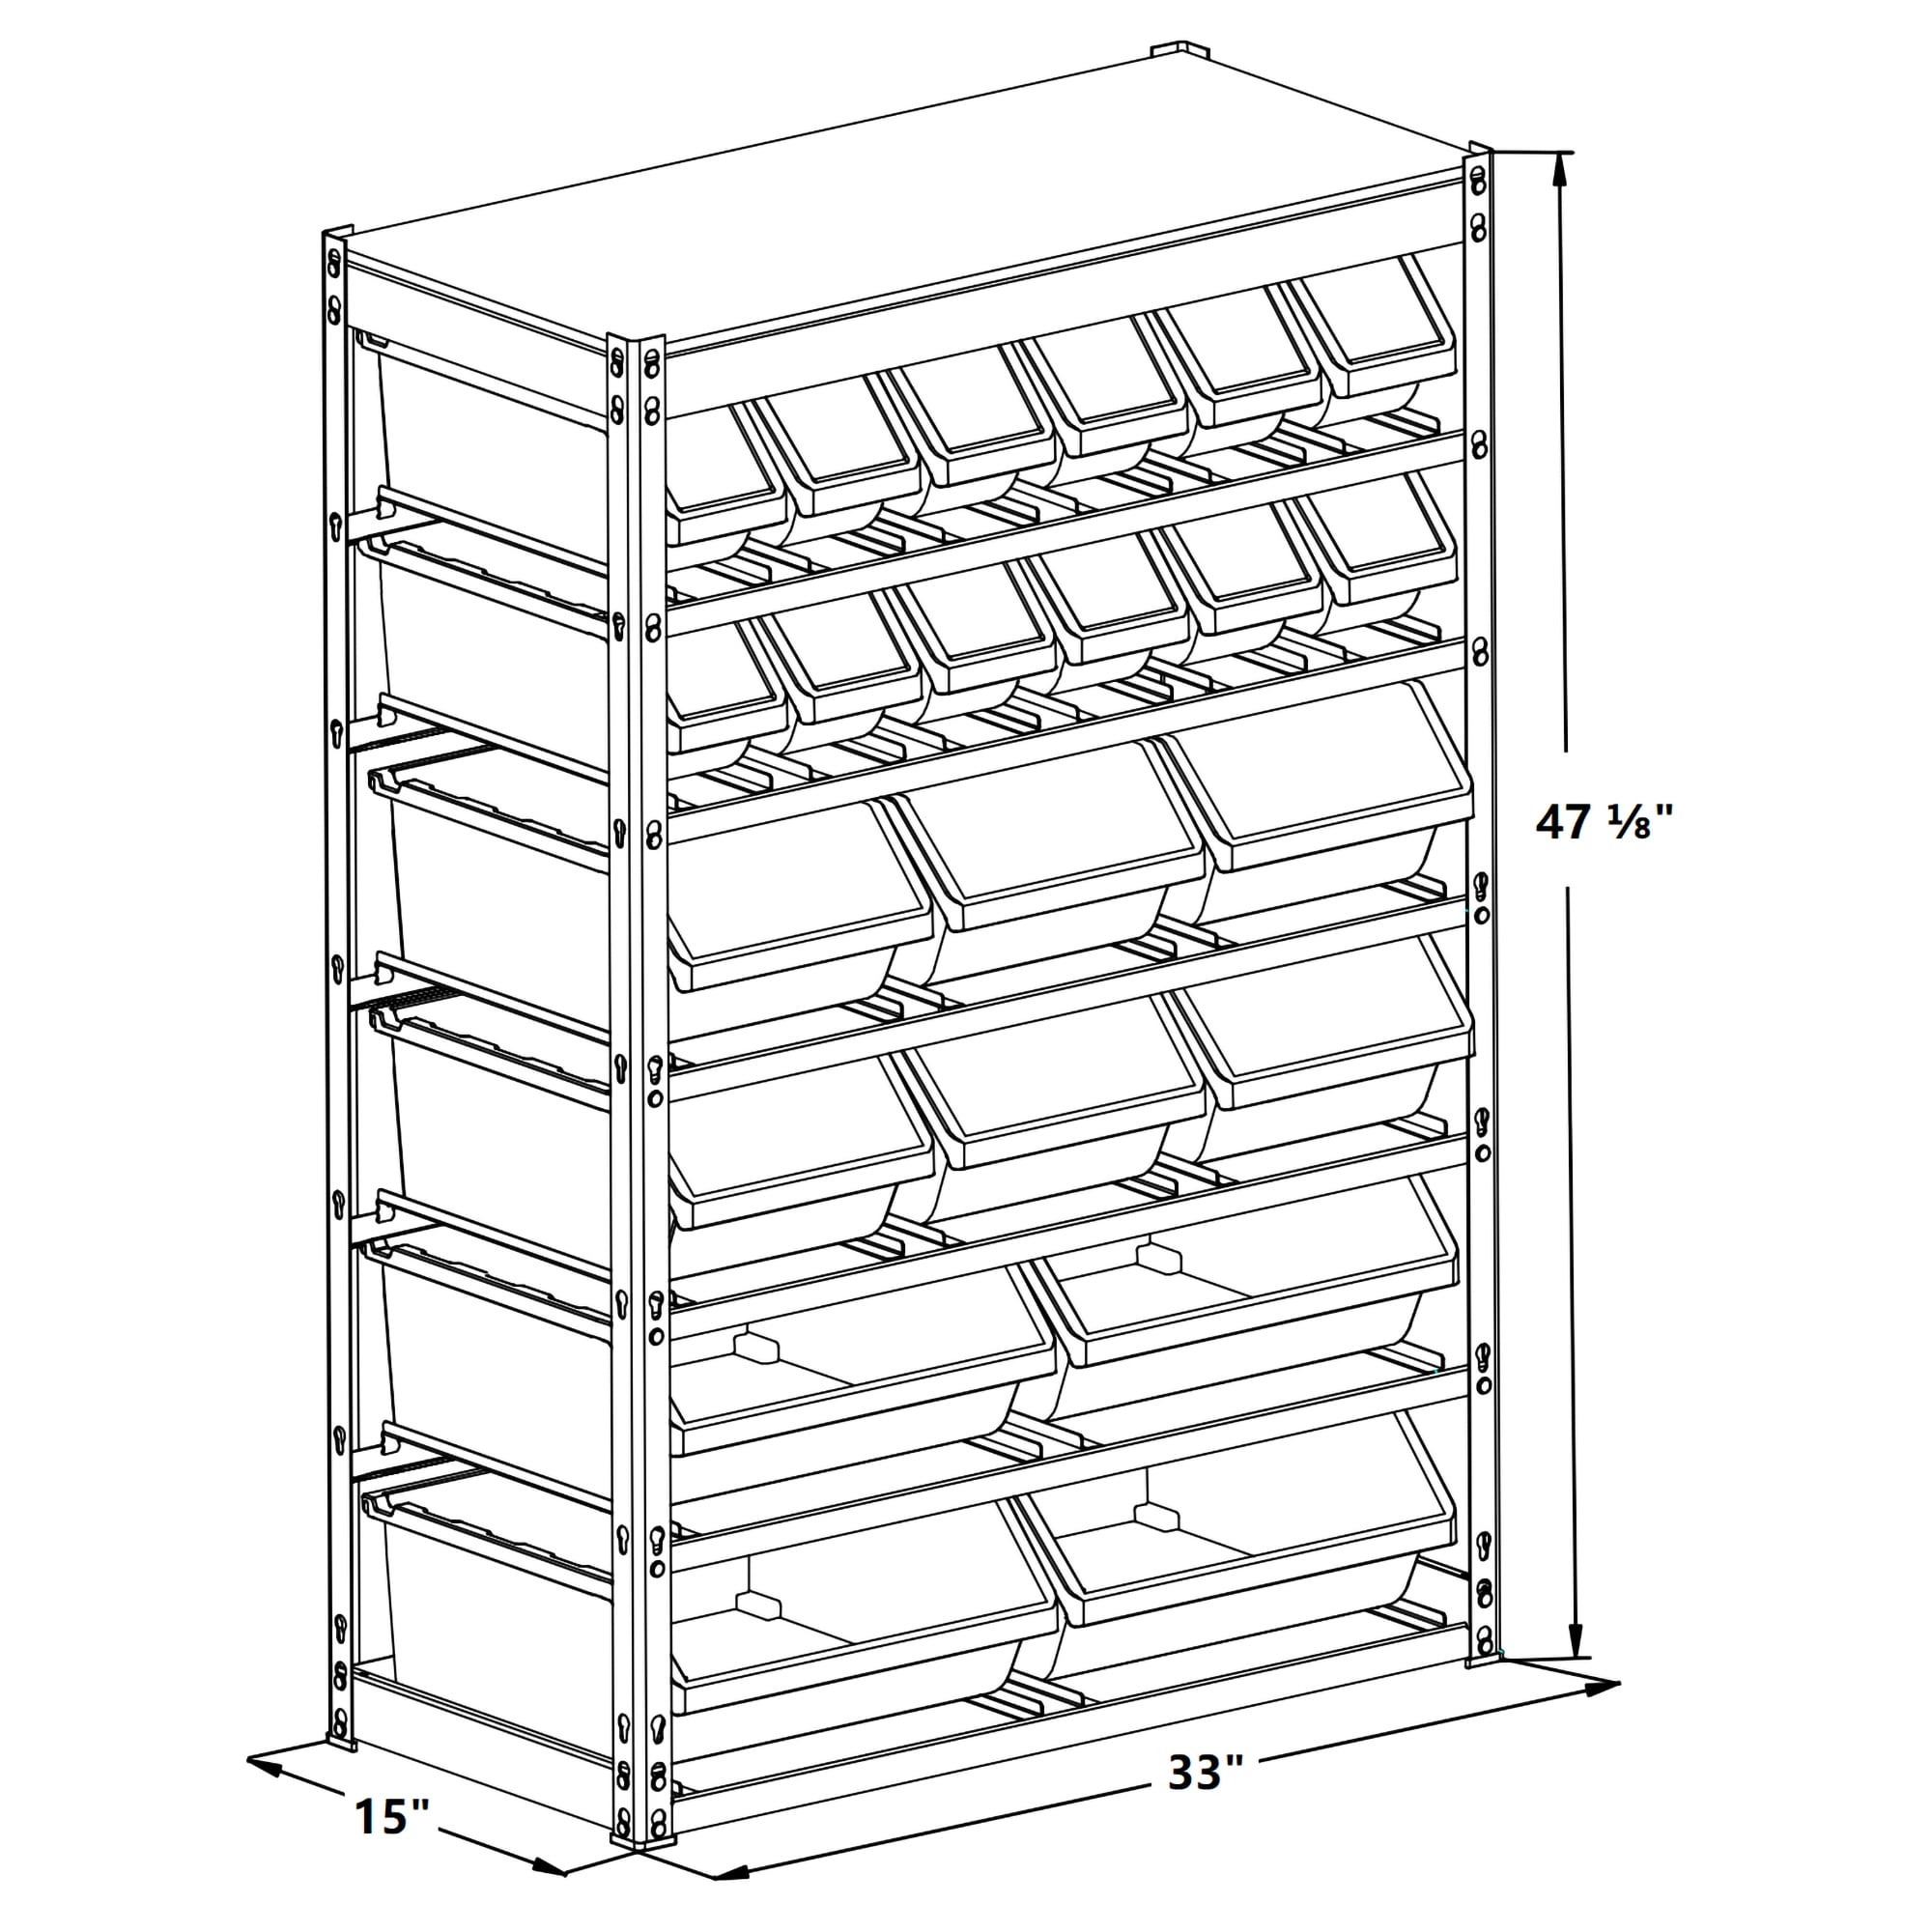 https://ak1.ostkcdn.com/images/products/is/images/direct/f47aa5925dc1095ec45baf622a05a7e61992e11e/King%27s-Rack-Bin-Rack-Storage-System-Heavy-Duty-Steel-Rack-Organizer-Shelving-Unit-w--22-Plastic-Bins-in-6-tiers.jpg